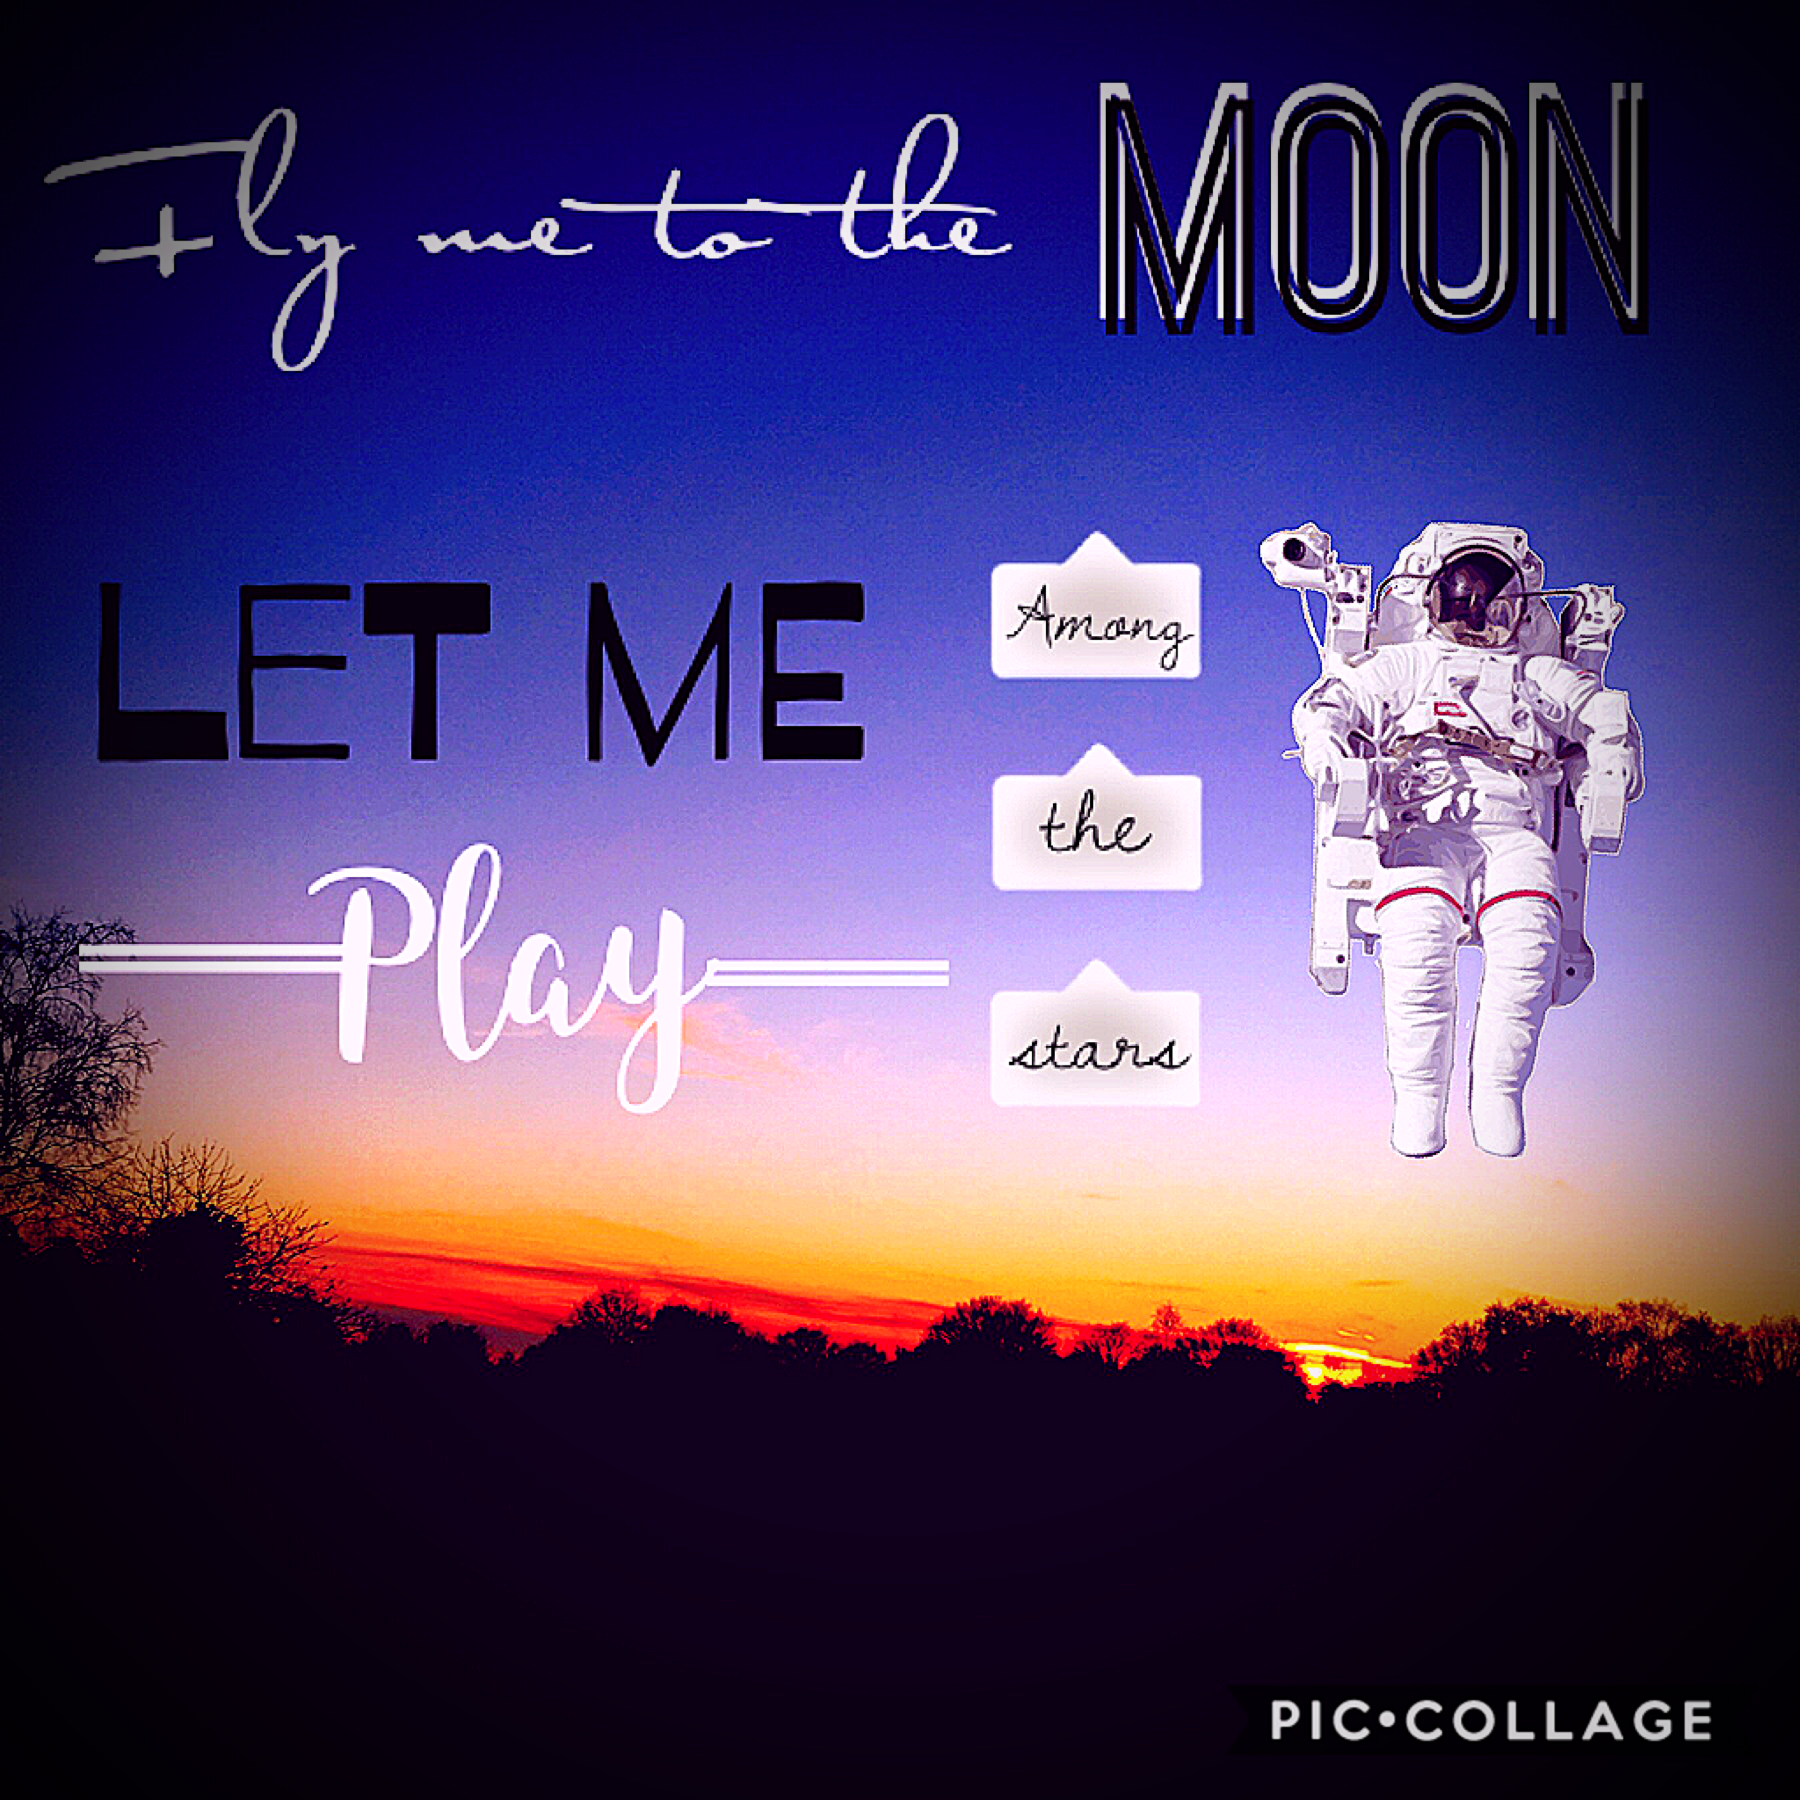 Fly me to the moon! 🌑 